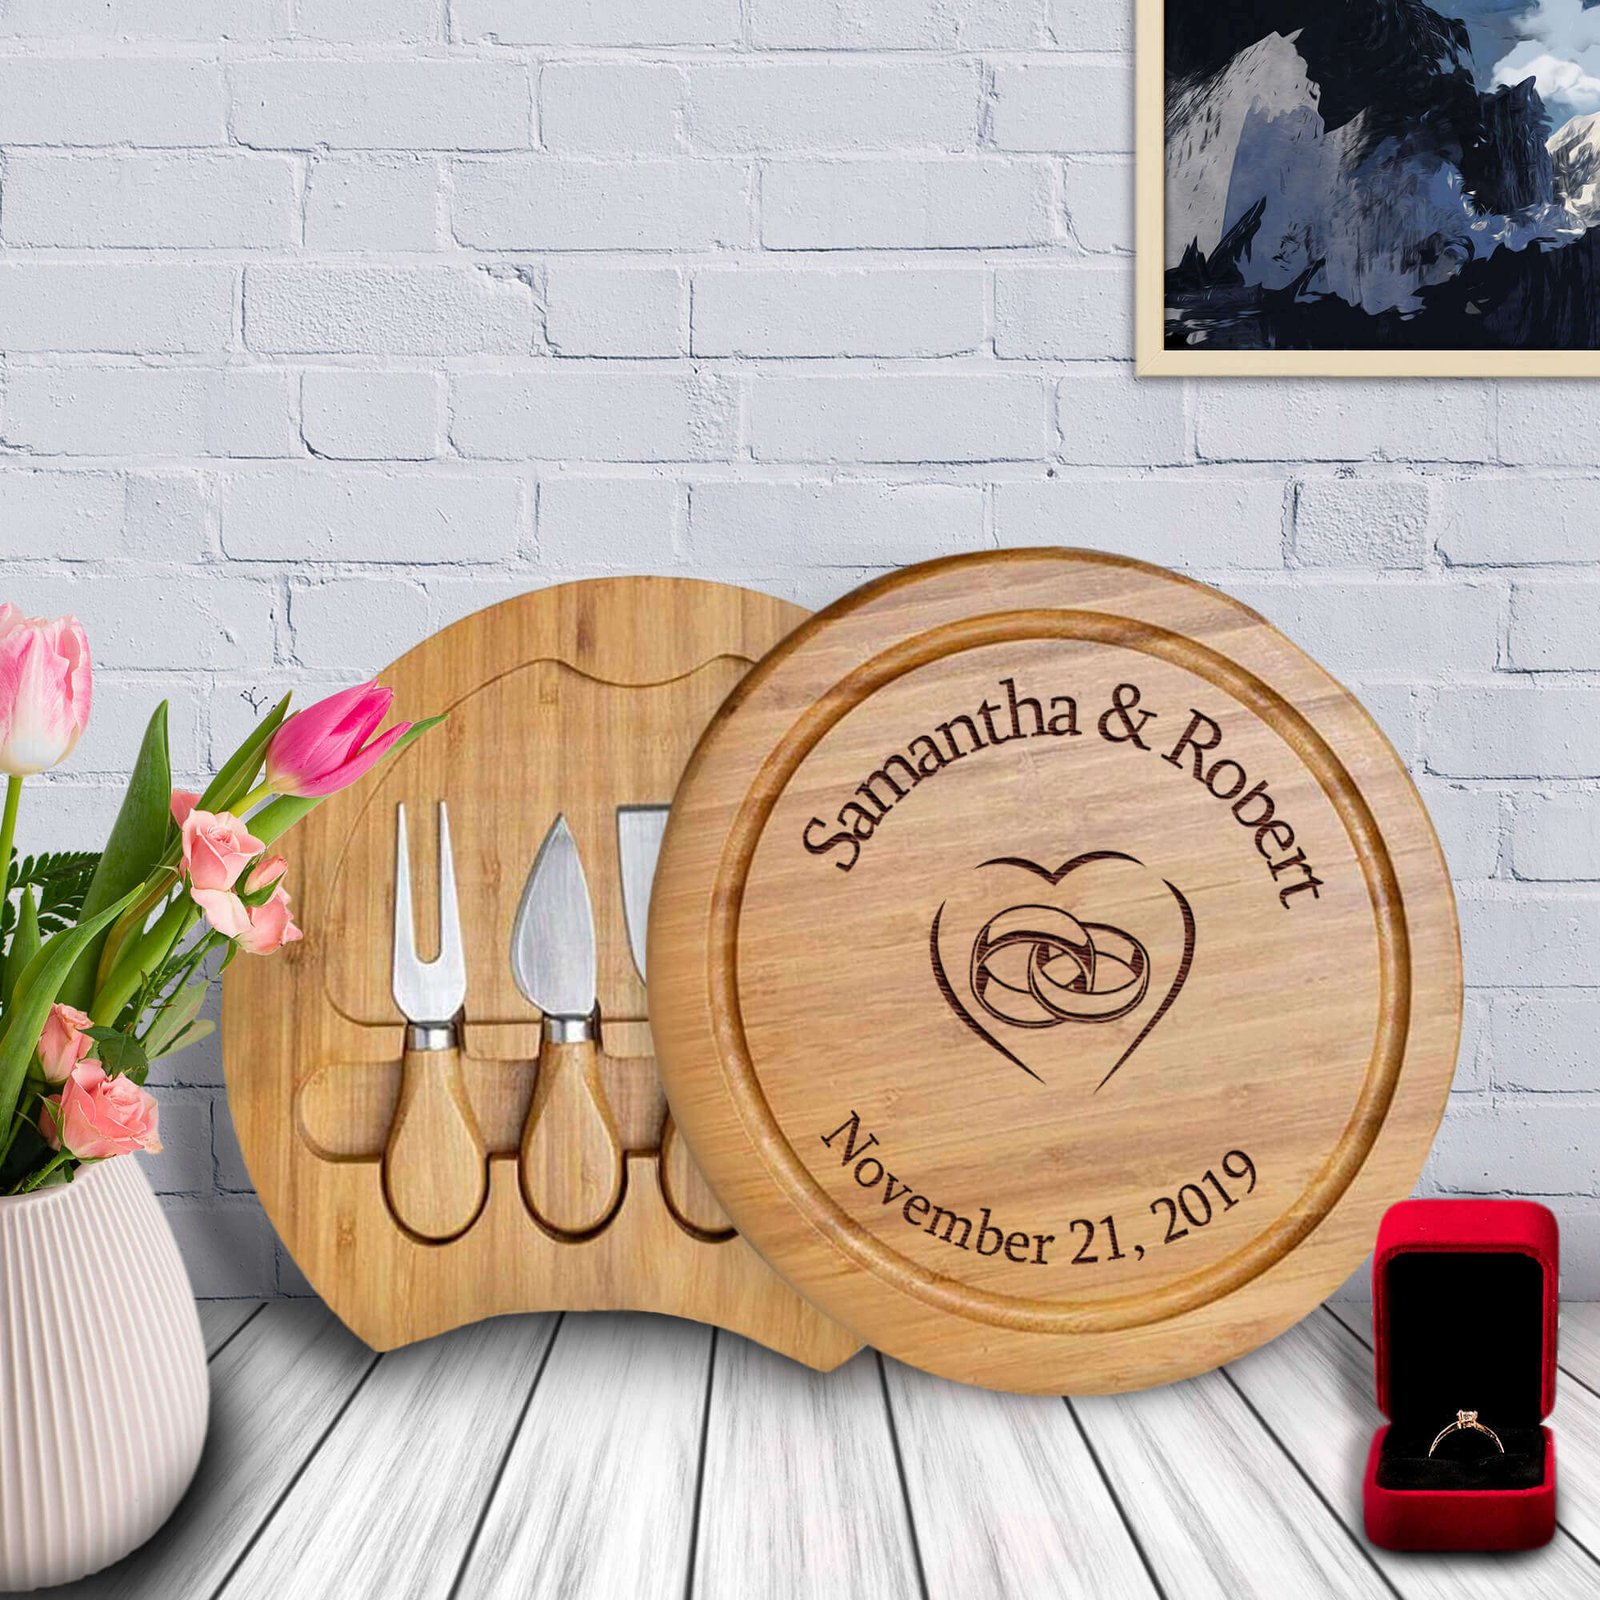 https://www.asperadesign.store/wp-content/uploads/2021/11/1.-Custom-Engraved-Cheese-Board-and-BBQ-Knife-Set-Unique-Gift-Ideas-for-Wedding-Presents-Housewarming-and-Special-Occasions-Aspera-Design-1.jpg